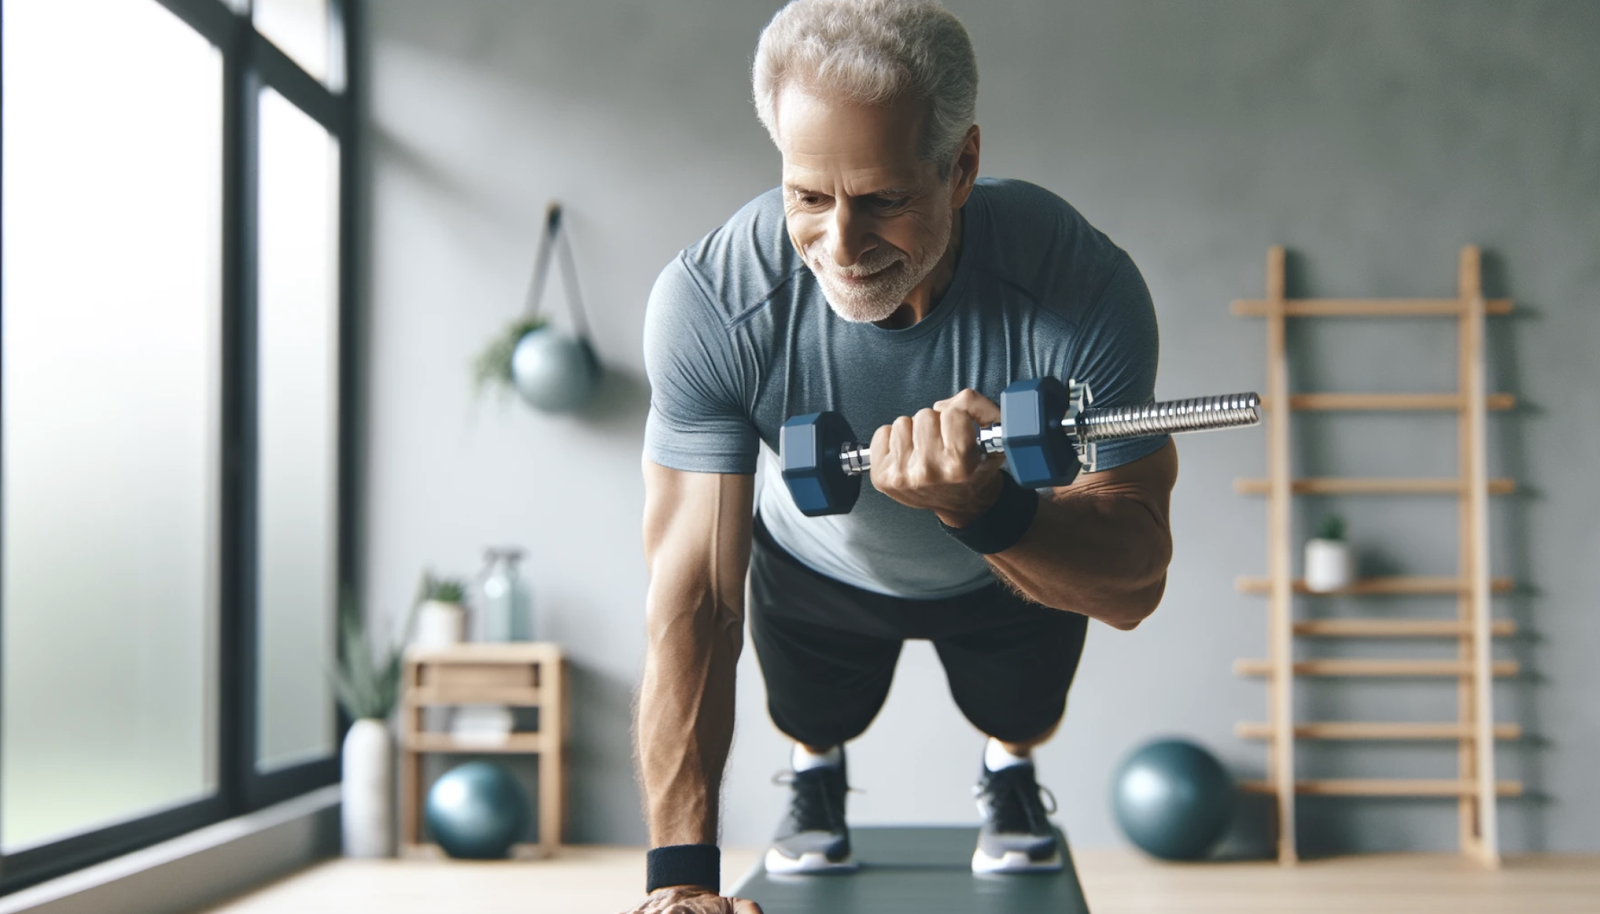 How To Build Muscle After 40: (Without Making The Gym Your Life)